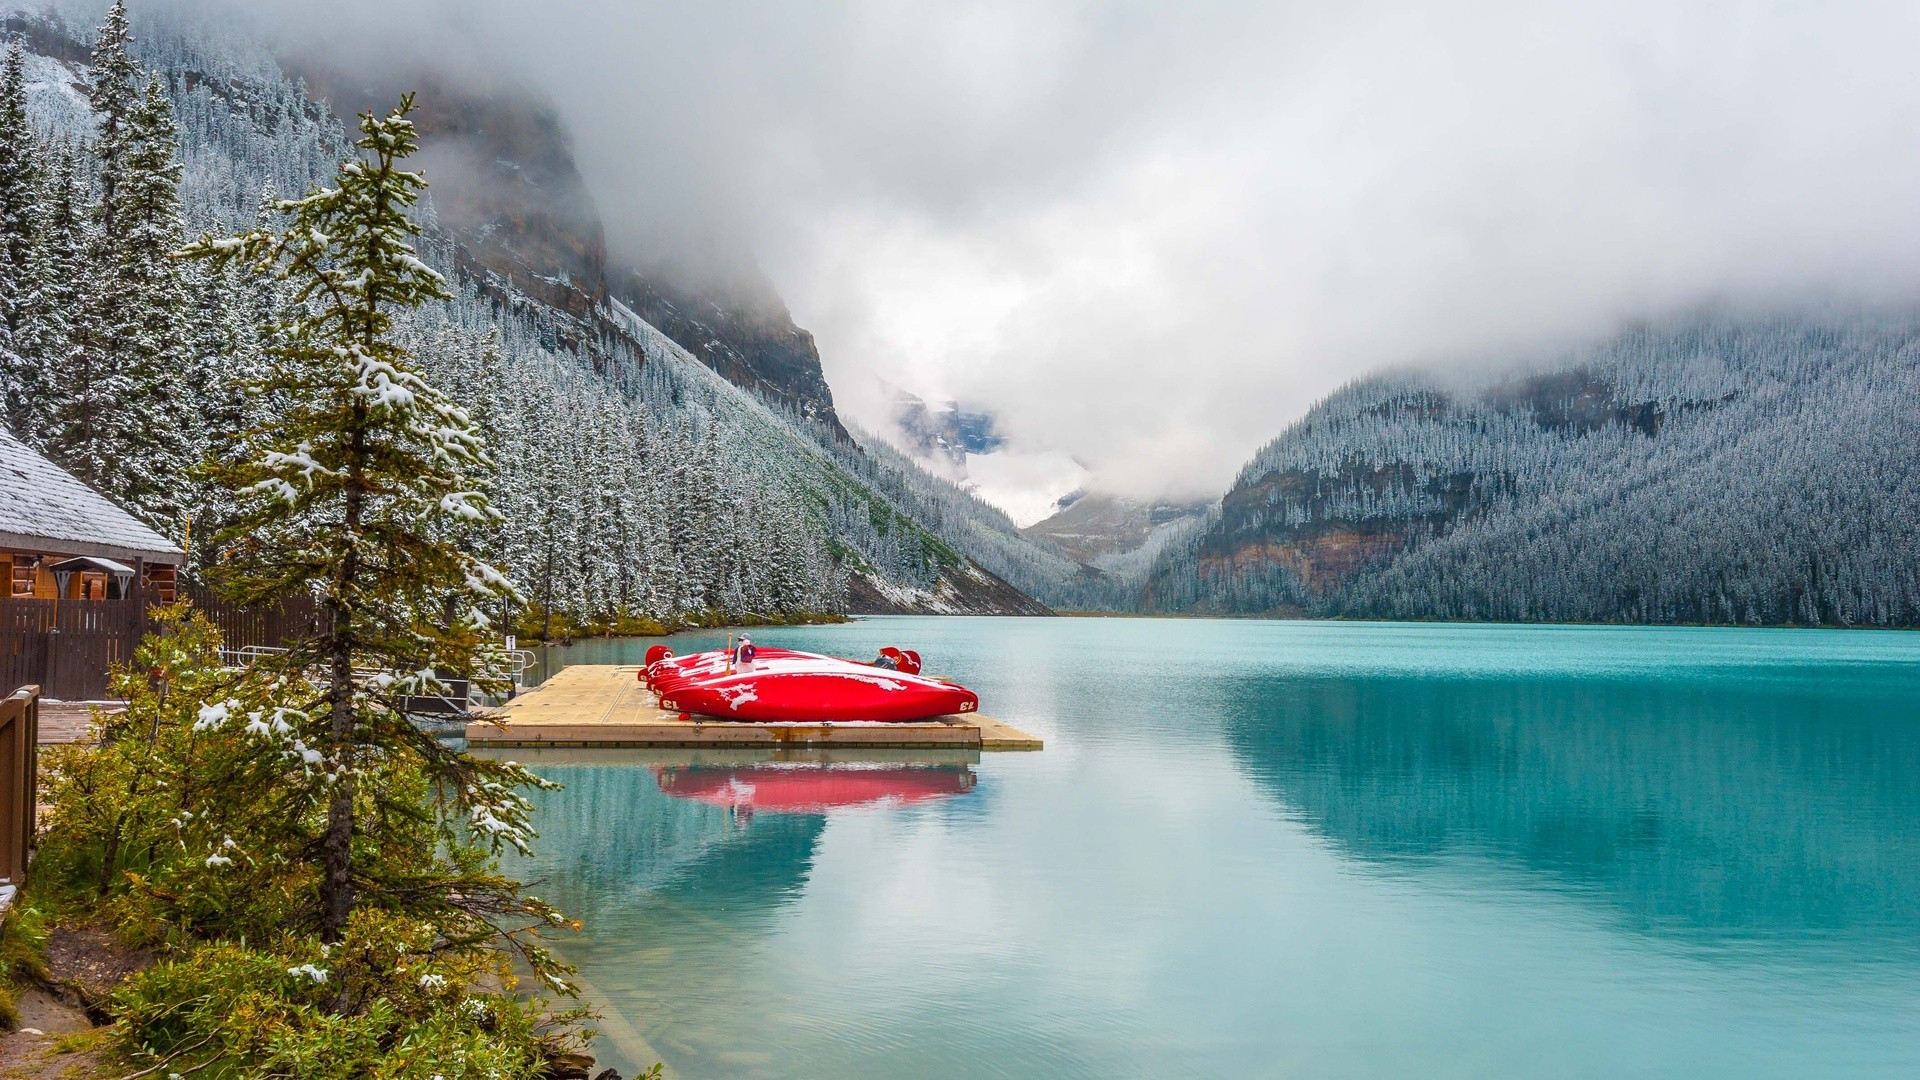 Free photo A red kayak on a blue lake in the mountains